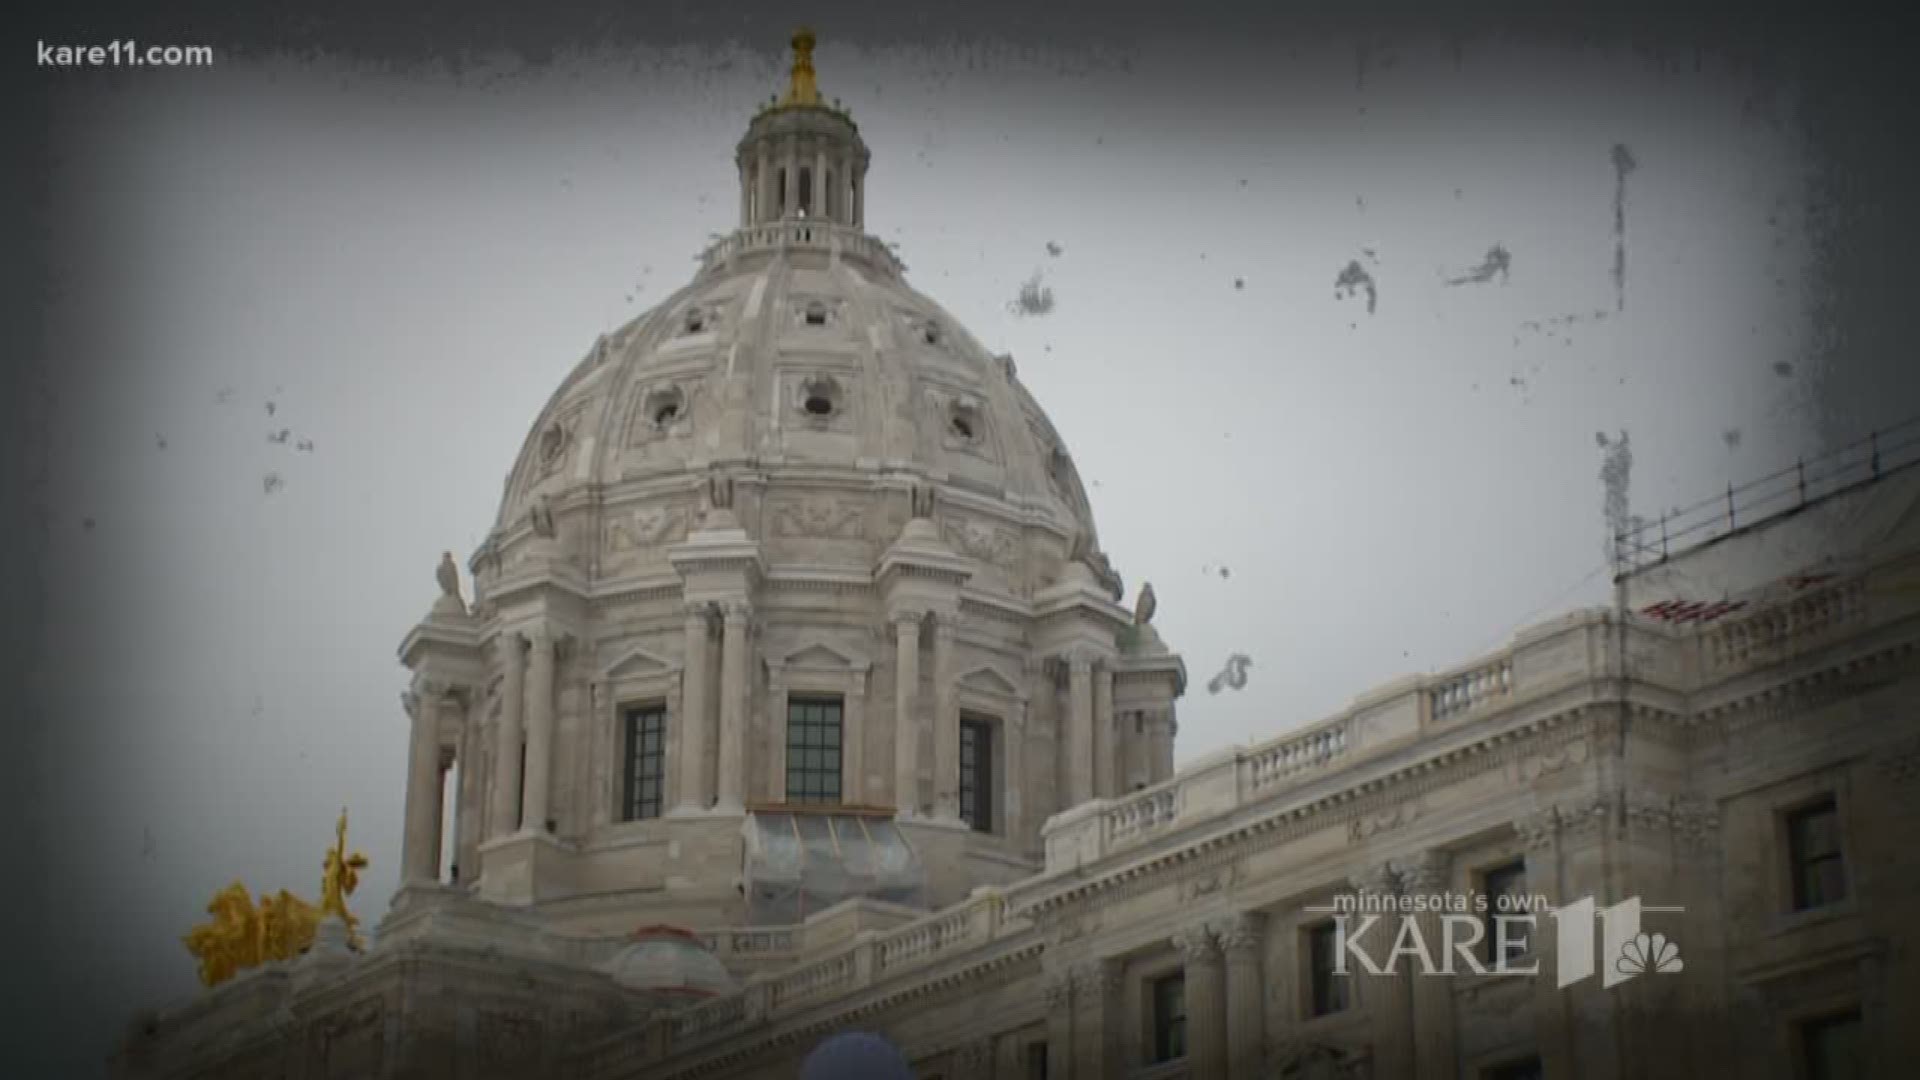 State Rep. Tony Cornish and State Sen. Dan Schoen are both resigning amid claims of sexual harassment. http://kare11.tv/2iFjERX